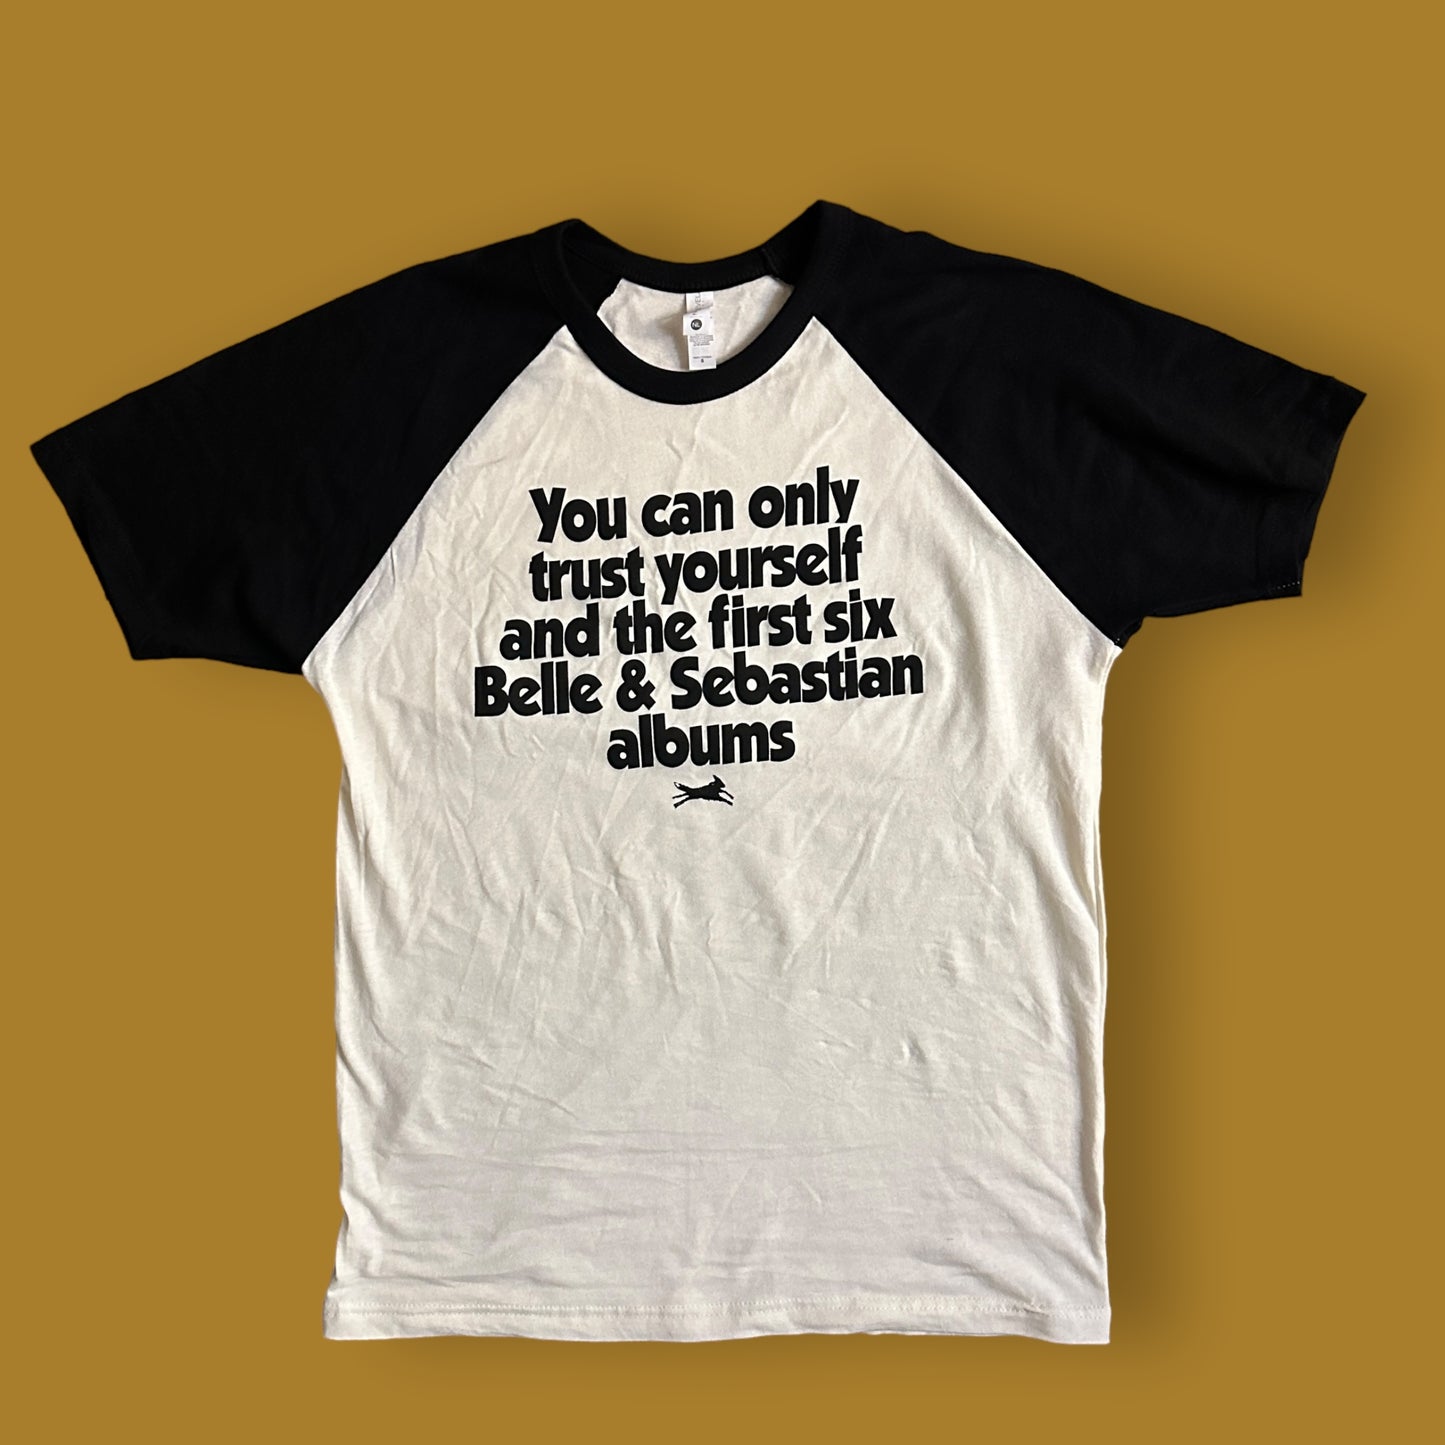 You Can Only Trust Yourself and the First Six Belle & Sebastian Albums T-shirt